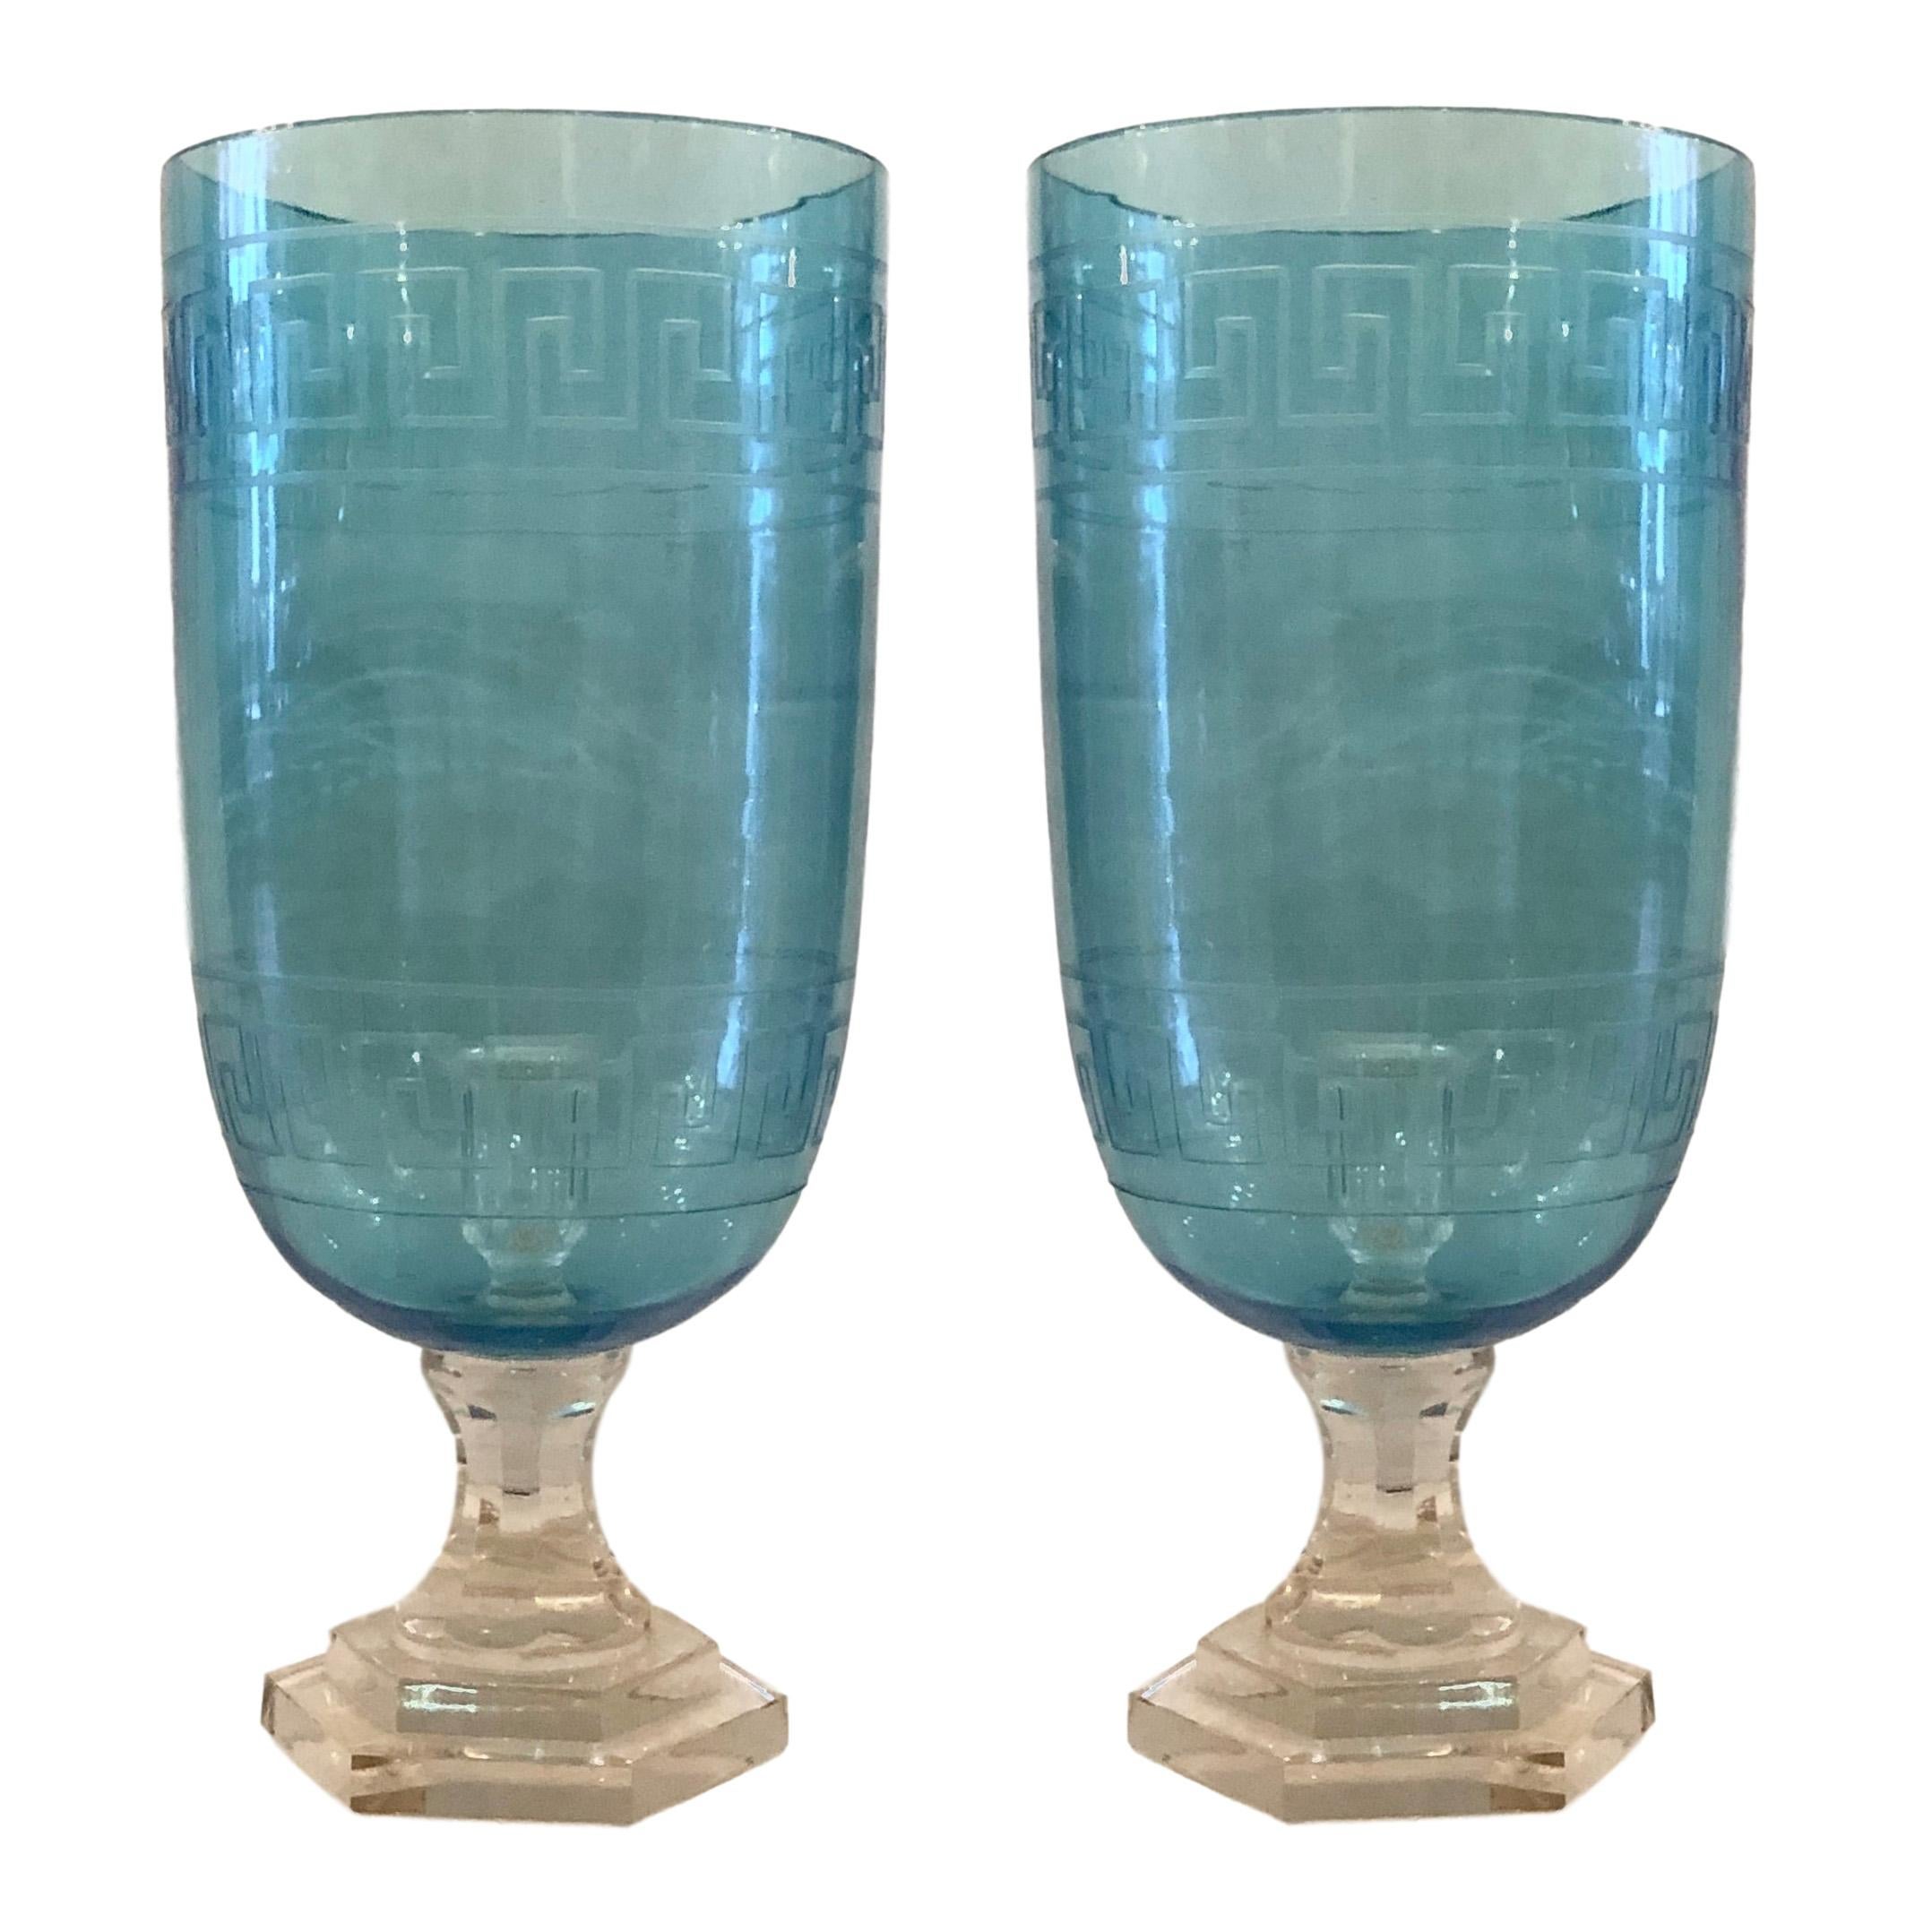 Mid-20th Century Pair of Etched Glass Hurricanes